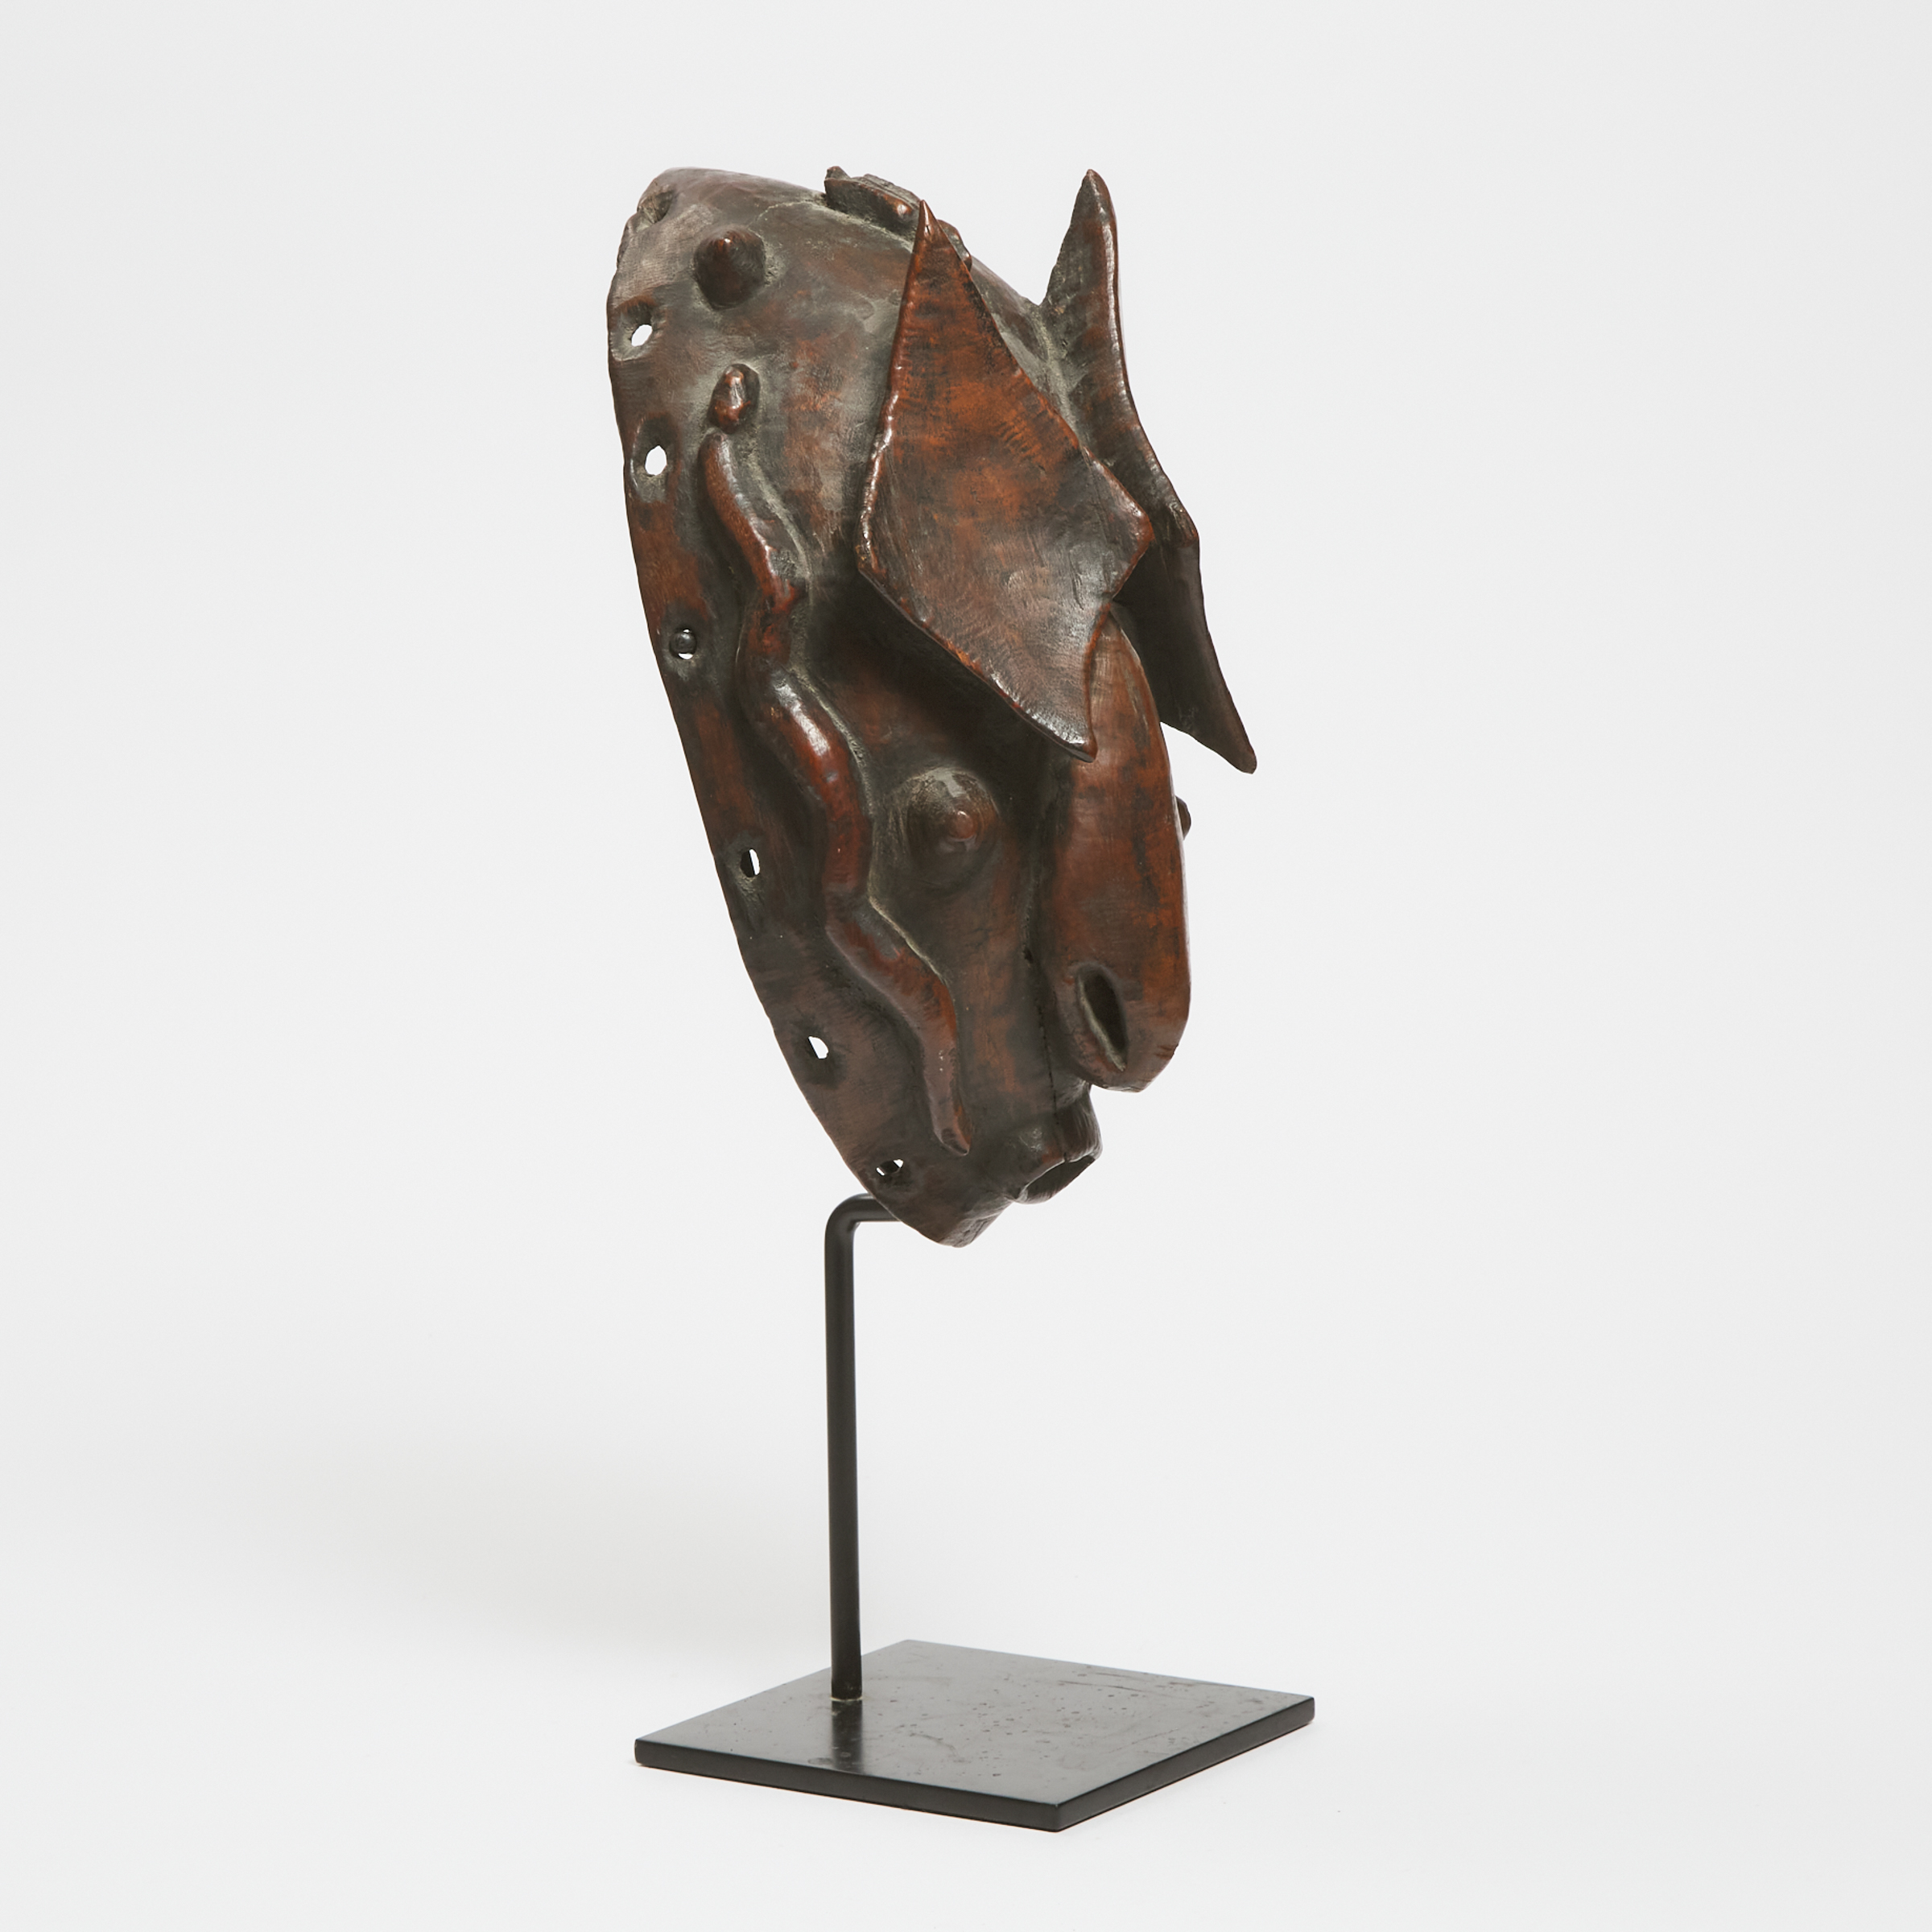 Unidentified African Mask, 20th century